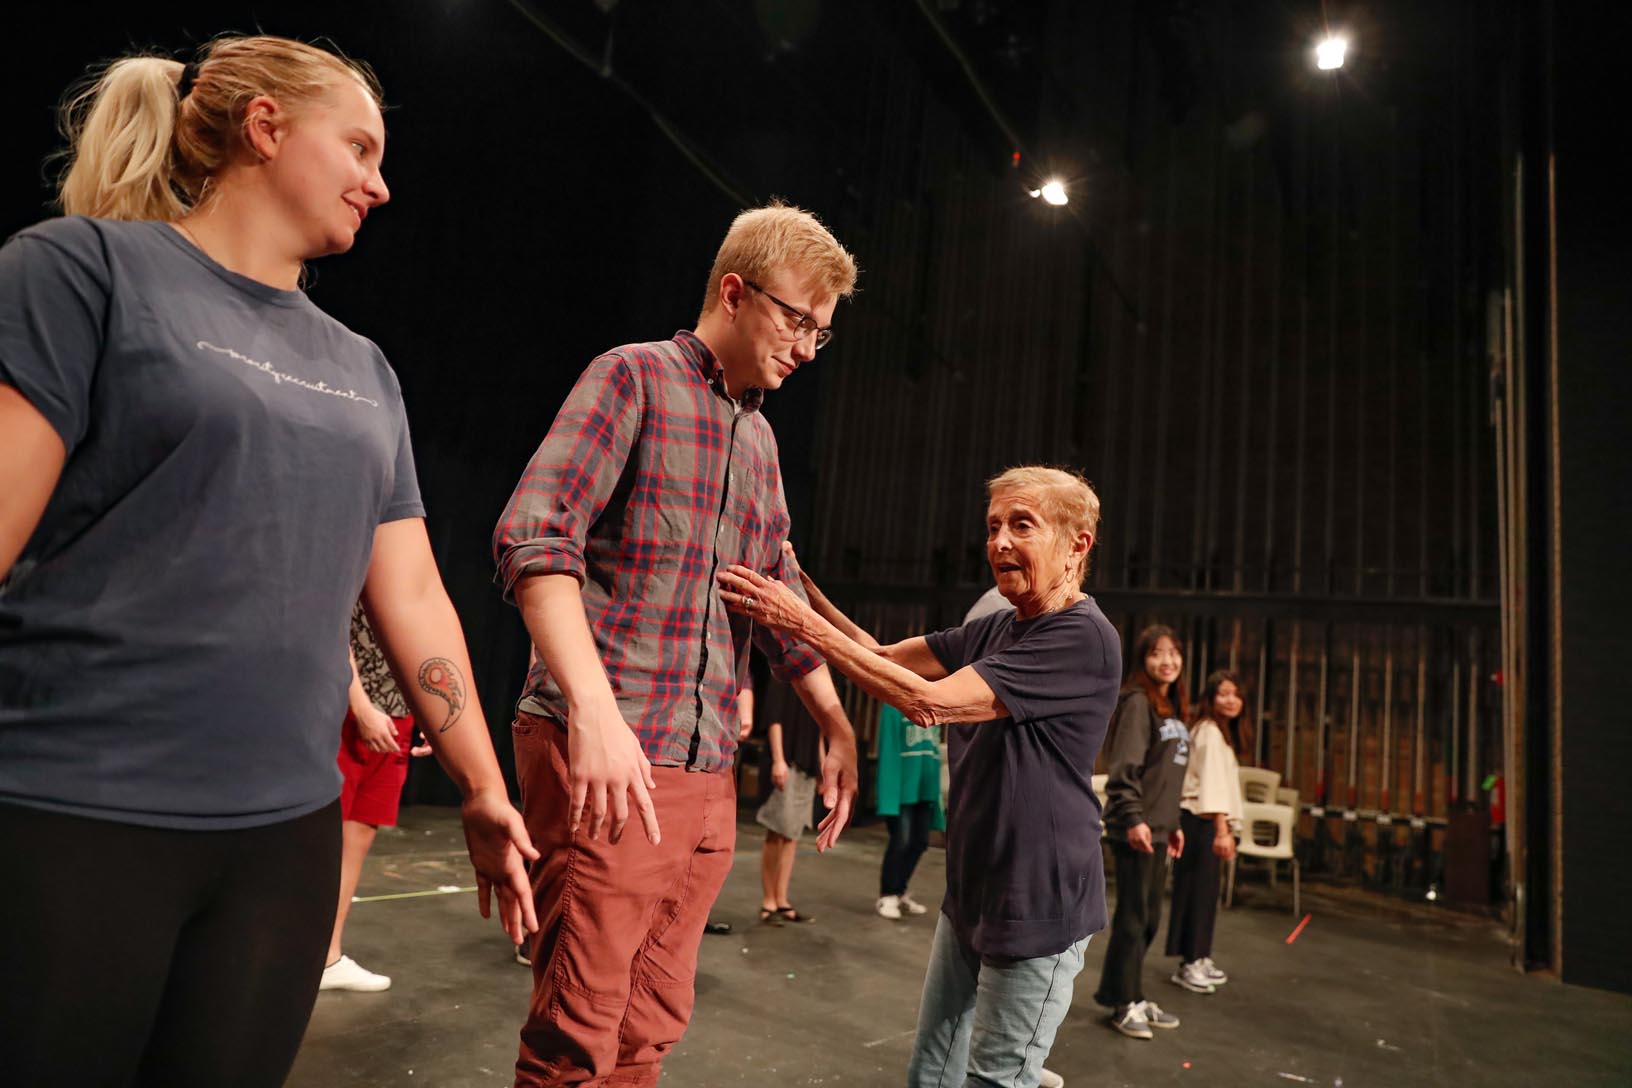 Patricia Birch works with UNK students as they rehearse for upcoming performances of “Orphan Train: The Musical.” Birch is an award-winning dancer, choreographer and Broadway director who has won two Emmys. (Photo by Corbey R. Dorsey, UNK Communications)